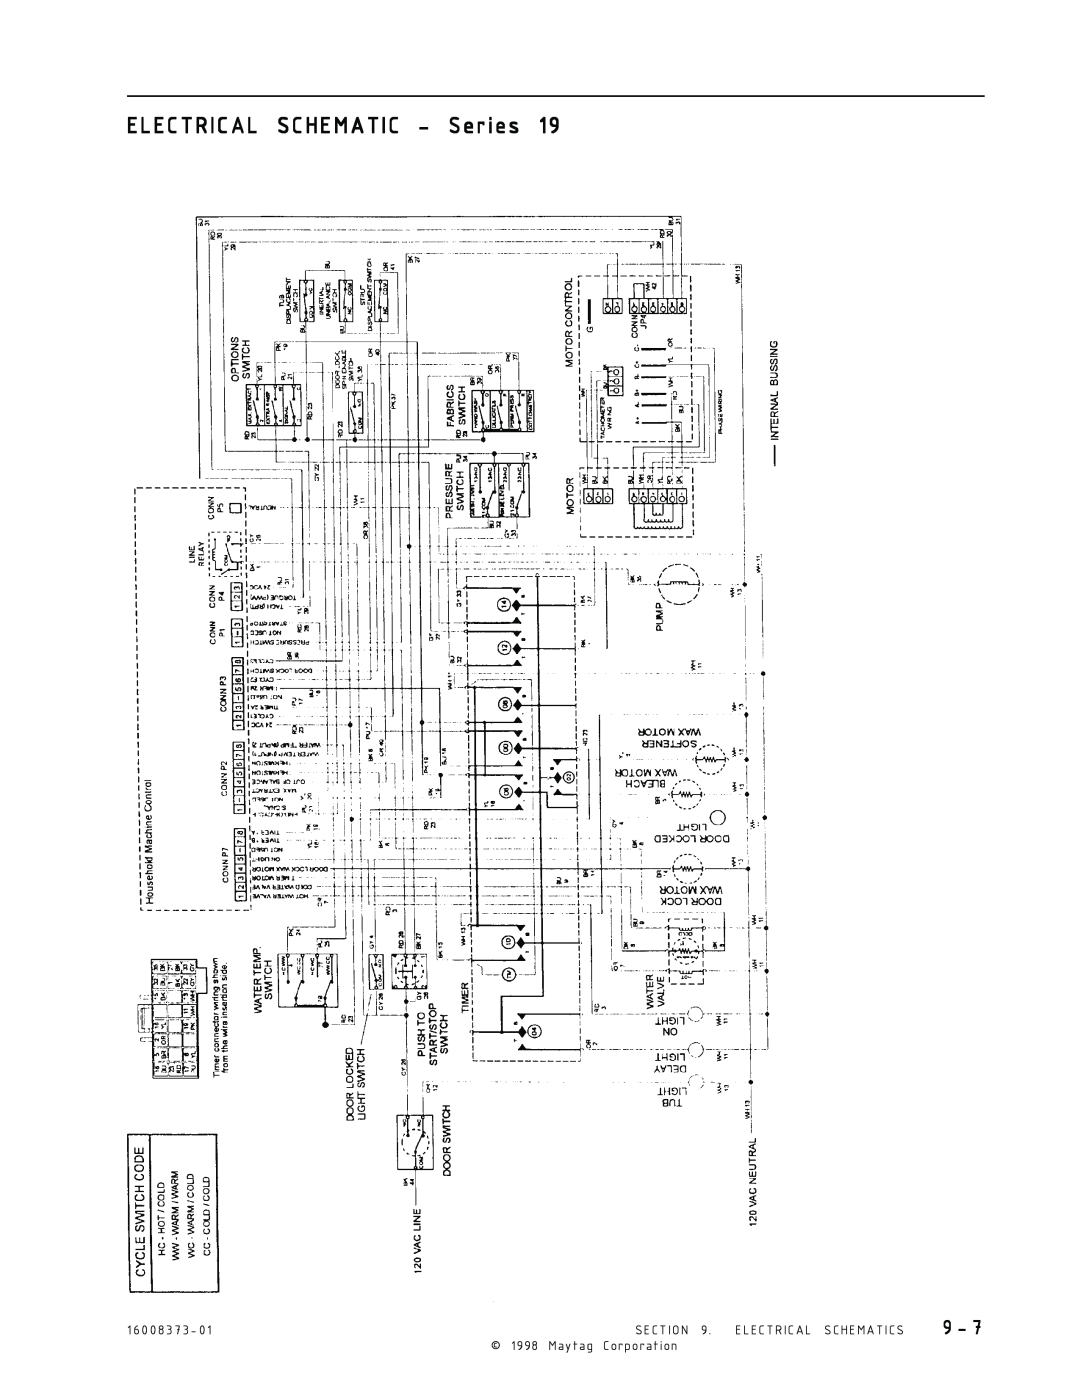 Whirlpool MAH3000 ELECTRICAL SCHEMATIC - Series, Section, Electrical Schematics, Maytag Corporation, 1 6 0 0 8 3 7 3 